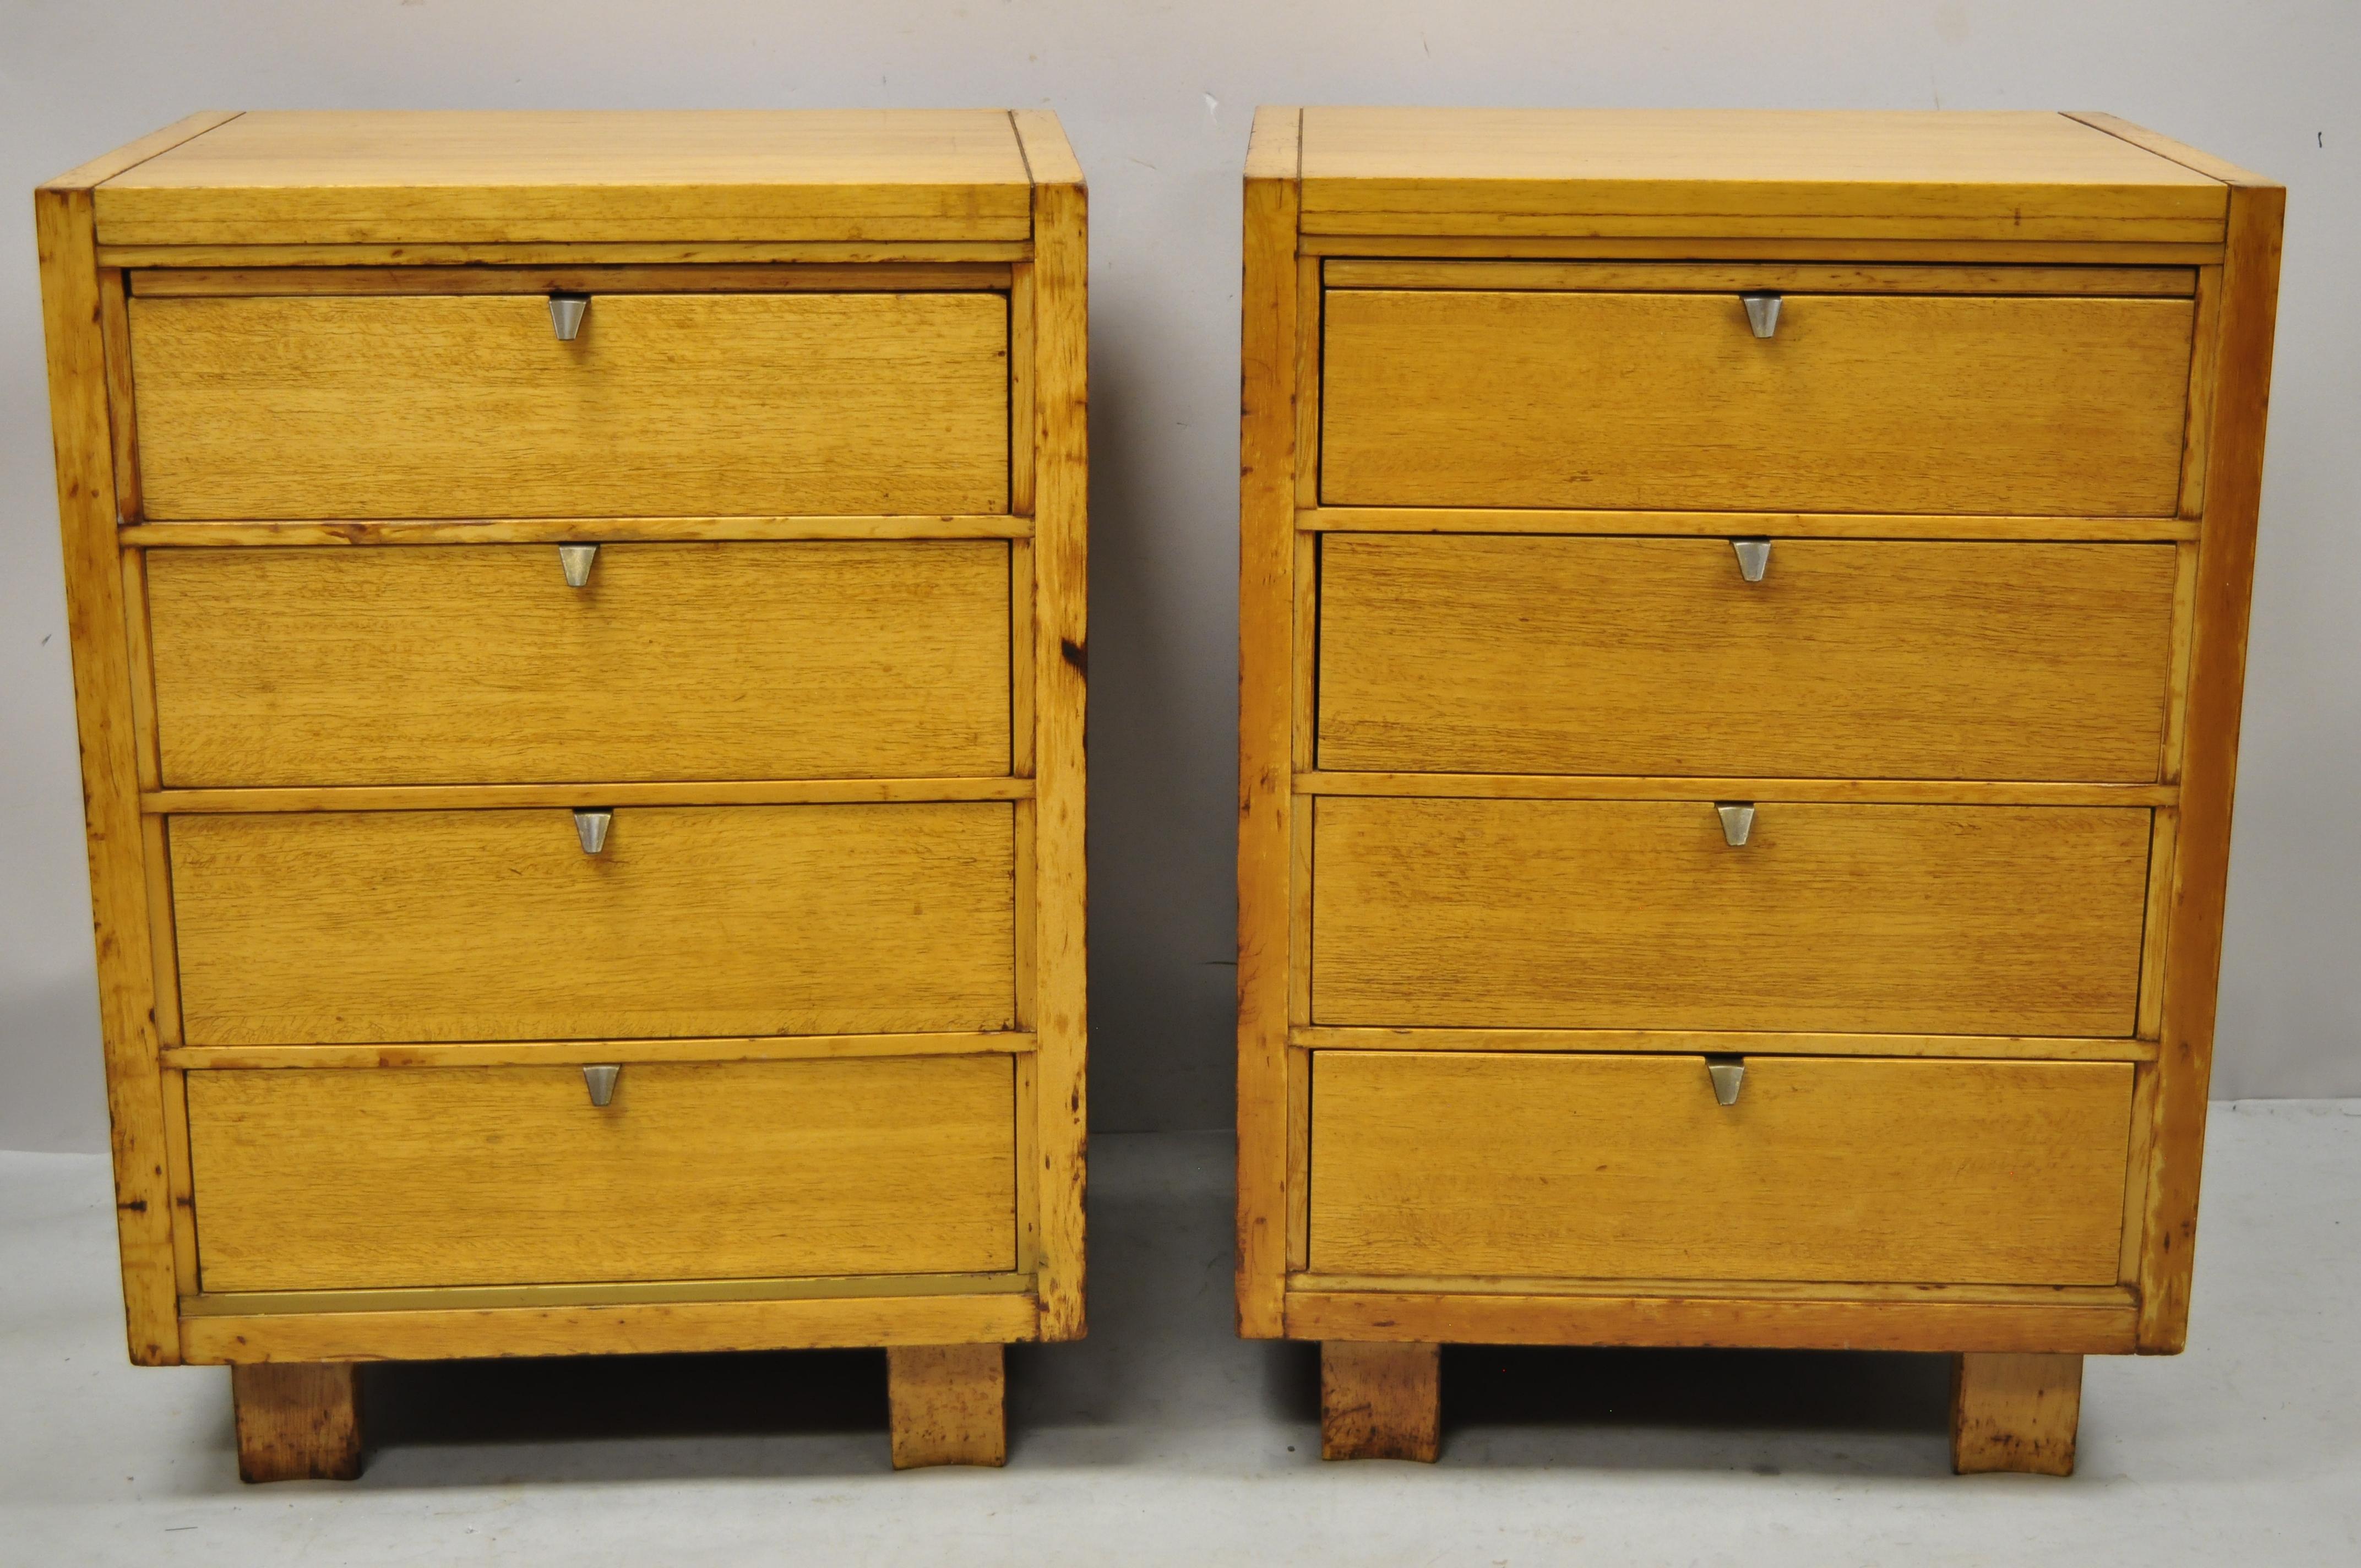 Mid-Century Modern mahogany Paul McCobb style 4 drawer chest nightstands - a pair. Item features shaped and angled legs, maker unconfirmed but quality and style similar to Paul McCobb, beautiful wood grain, 4 dovetailed drawers, solid brass